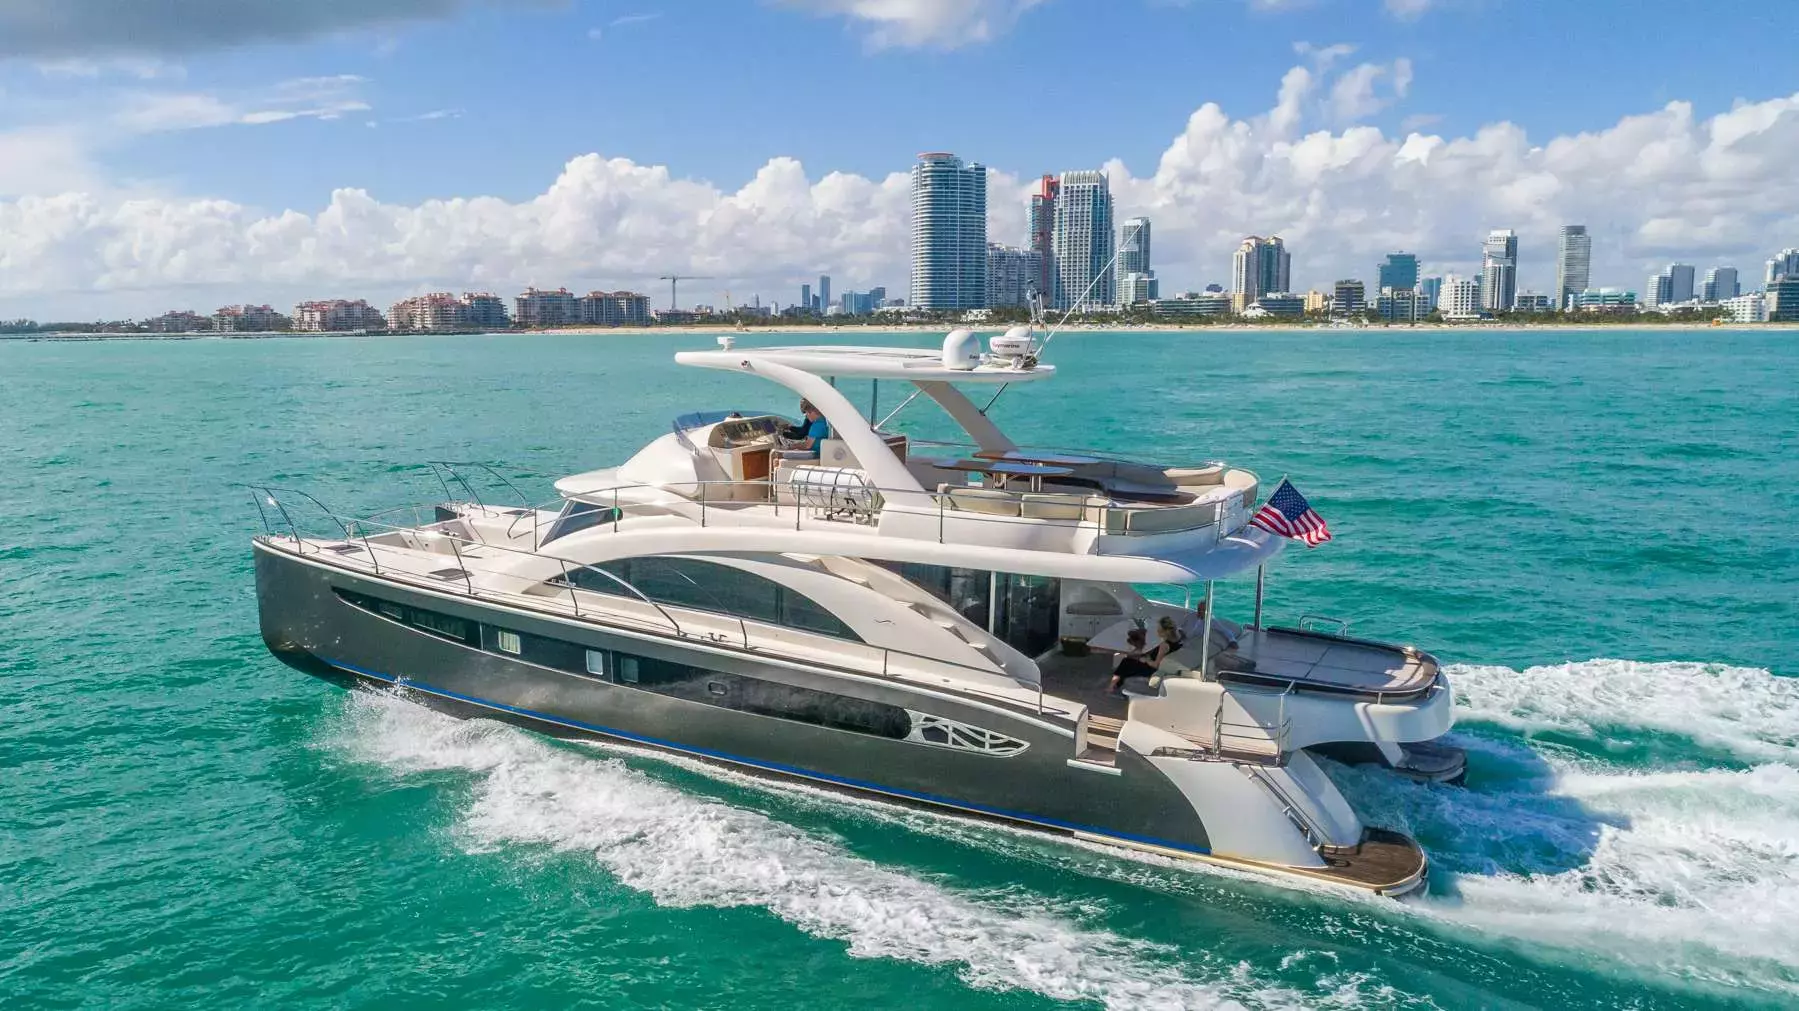 Legend & Soul by Rodriguez Yachts - Top rates for a Rental of a private Power Catamaran in Florida USA